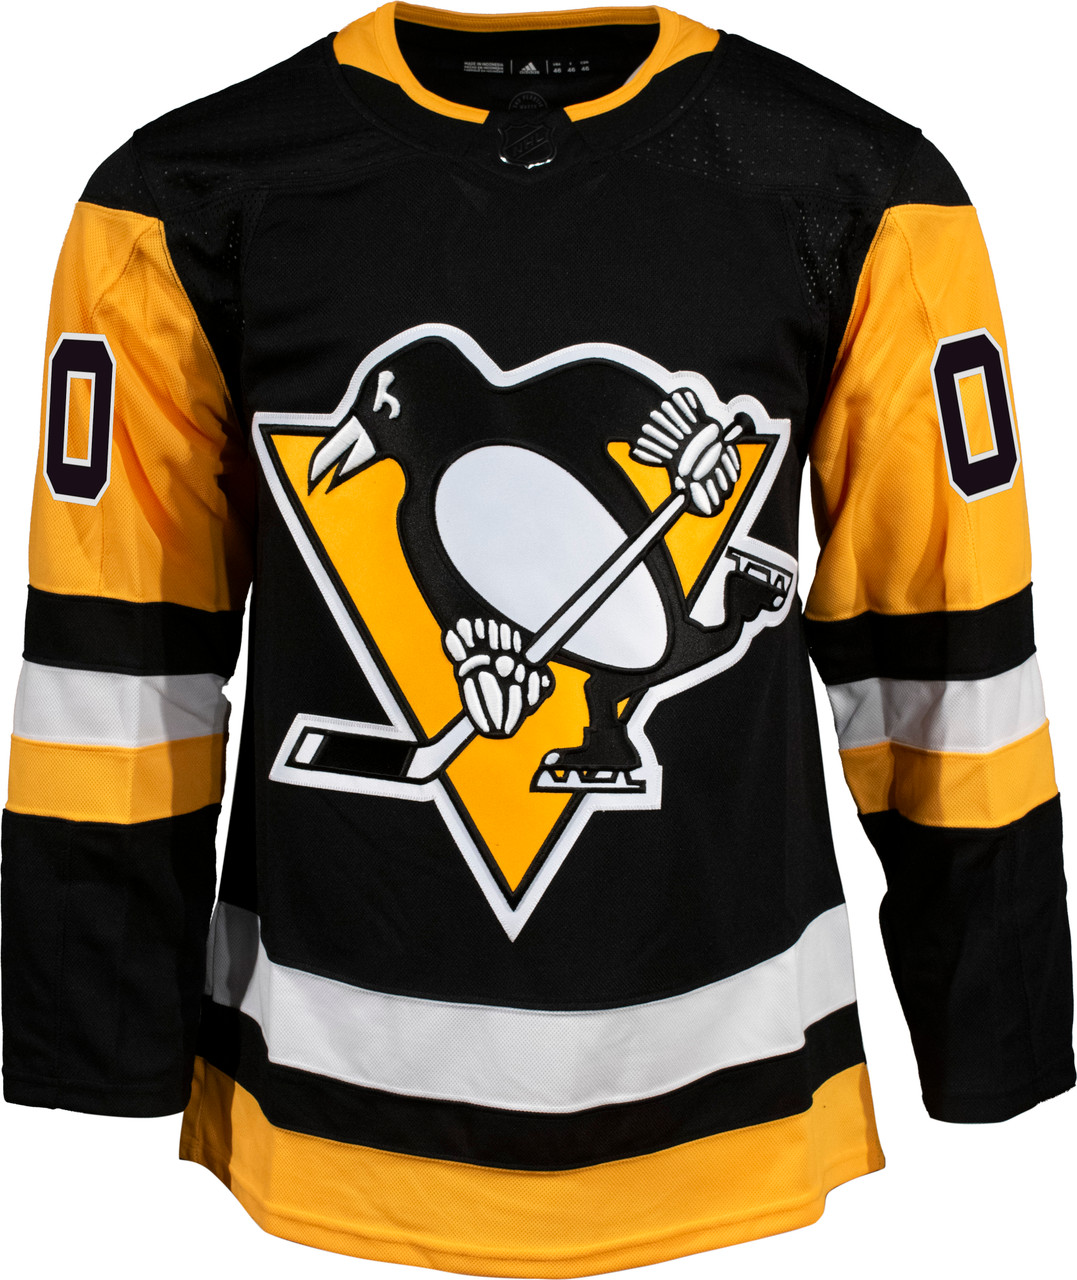 adidas NHL Pittsburgh Penguins Authentic Pro Home Jersey